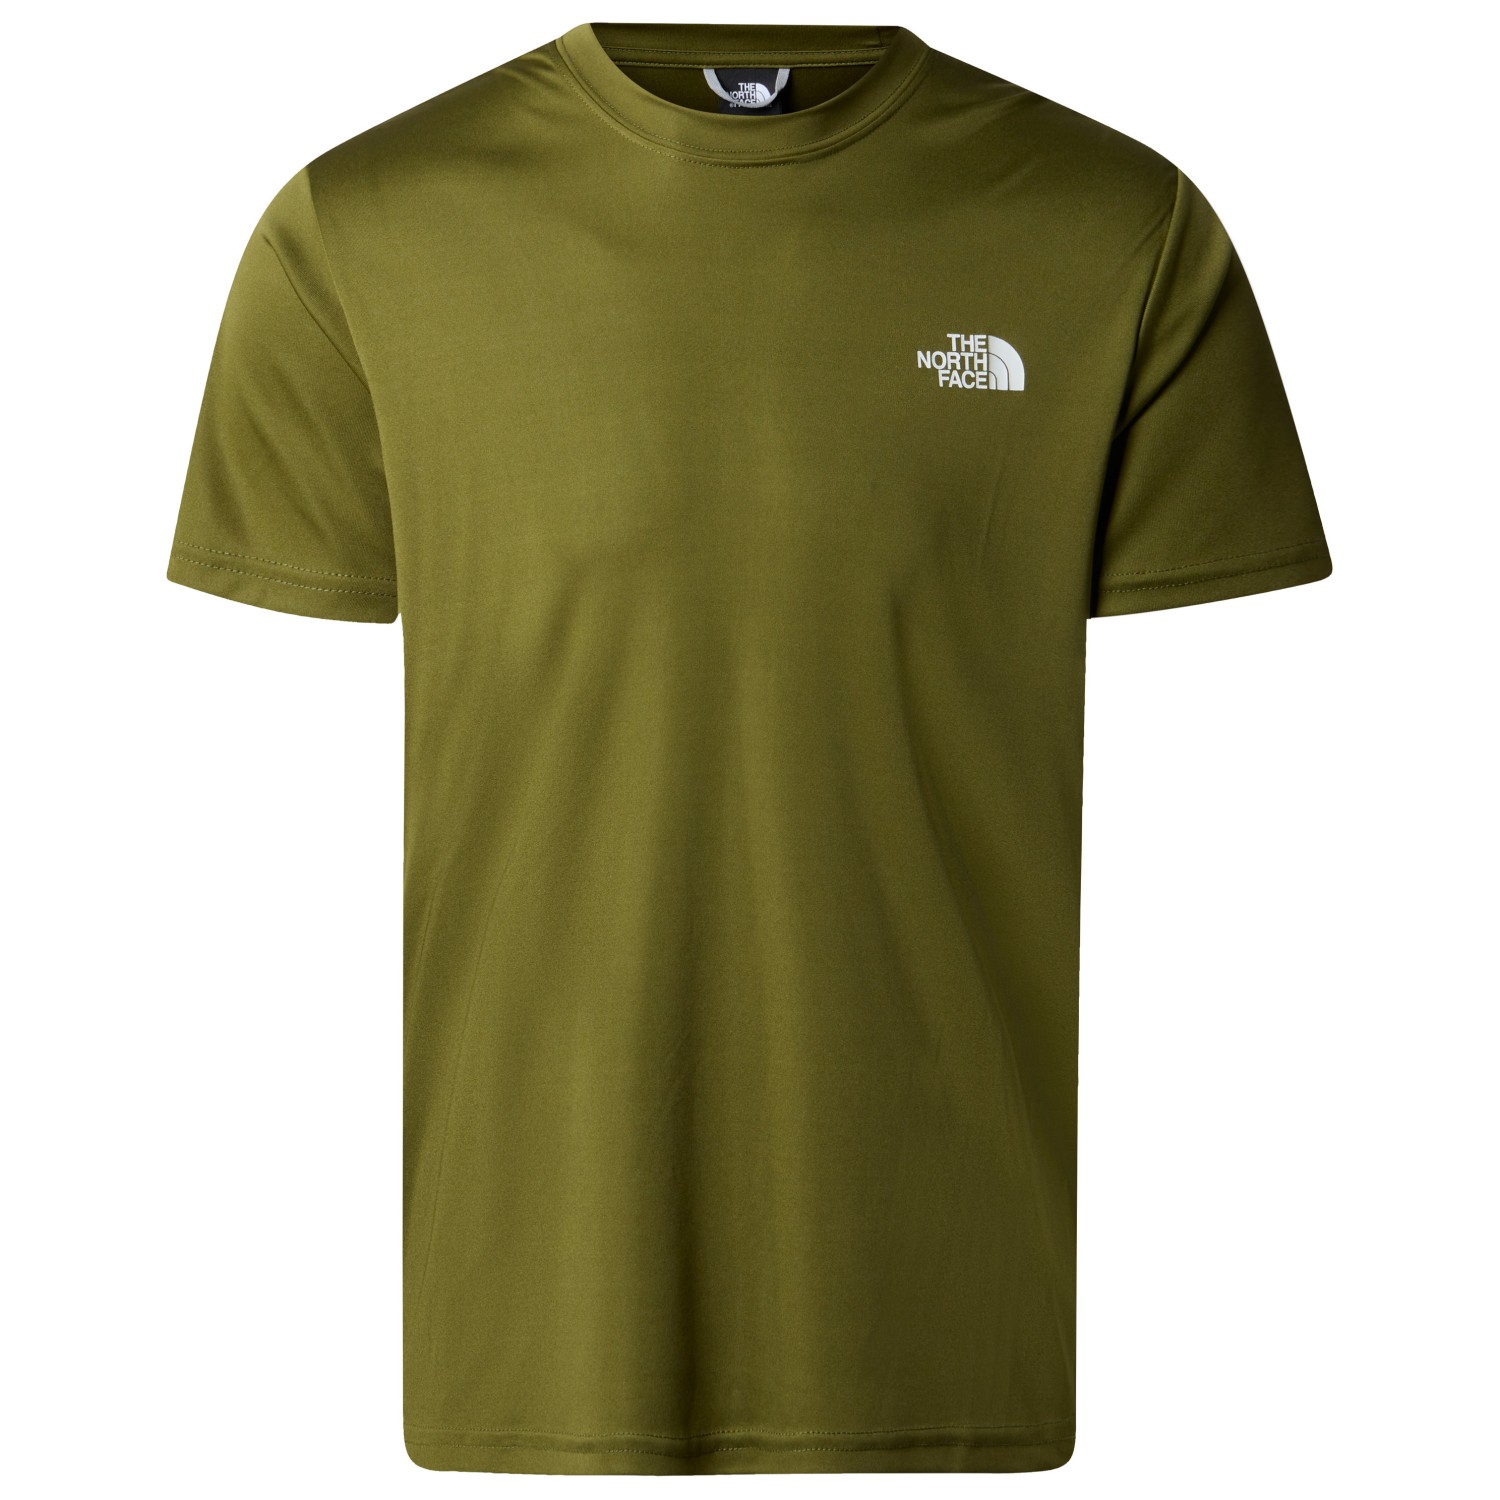 Функциональная рубашка The North Face Reaxion Red Box Tee, цвет Forest Olive stout rex the red box